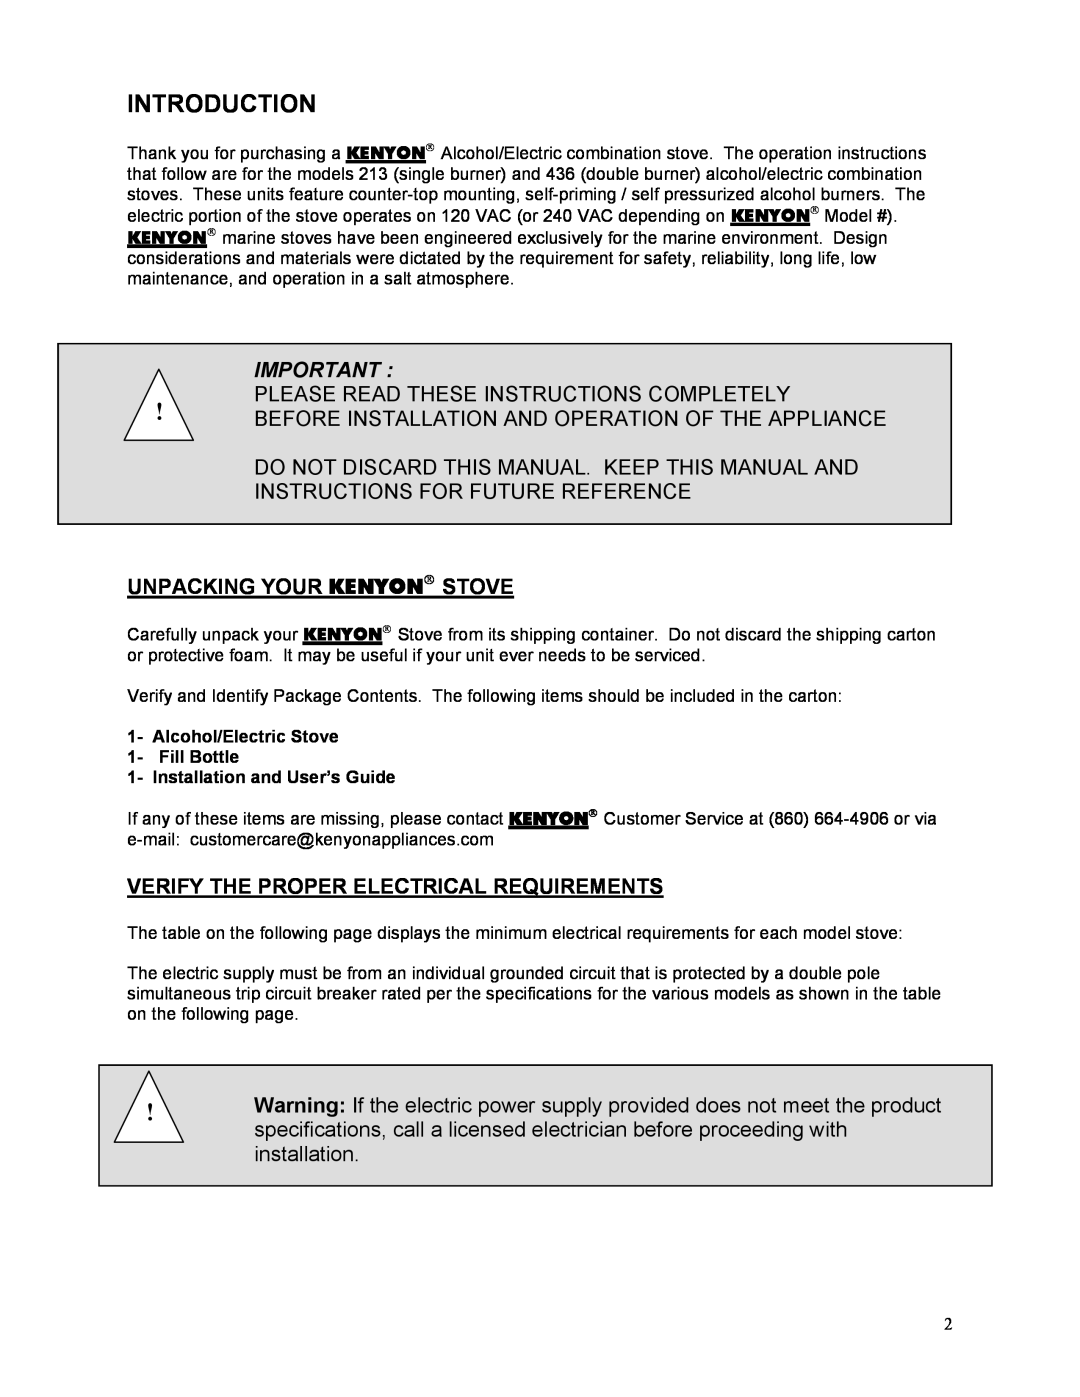 Kenyon 436, 213 manual Introduction, Unpacking Your Kenyon Stove, Verify The Proper Electrical Requirements 